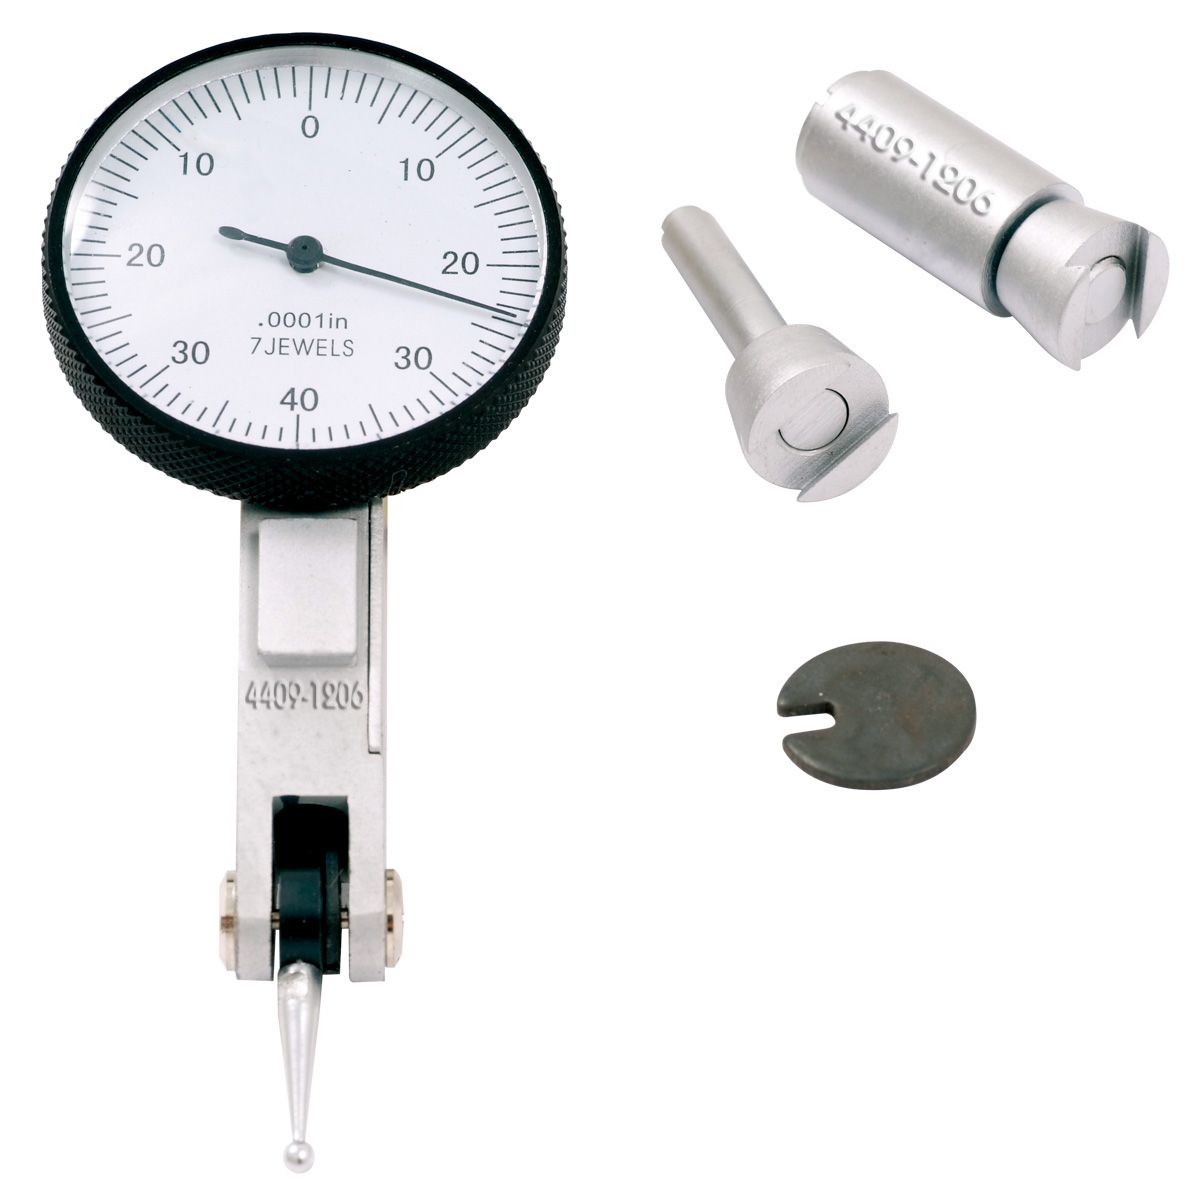 0-0.008" DIAL TEST INDICATOR WITH .0001" GRADUATION  (4409-1206)